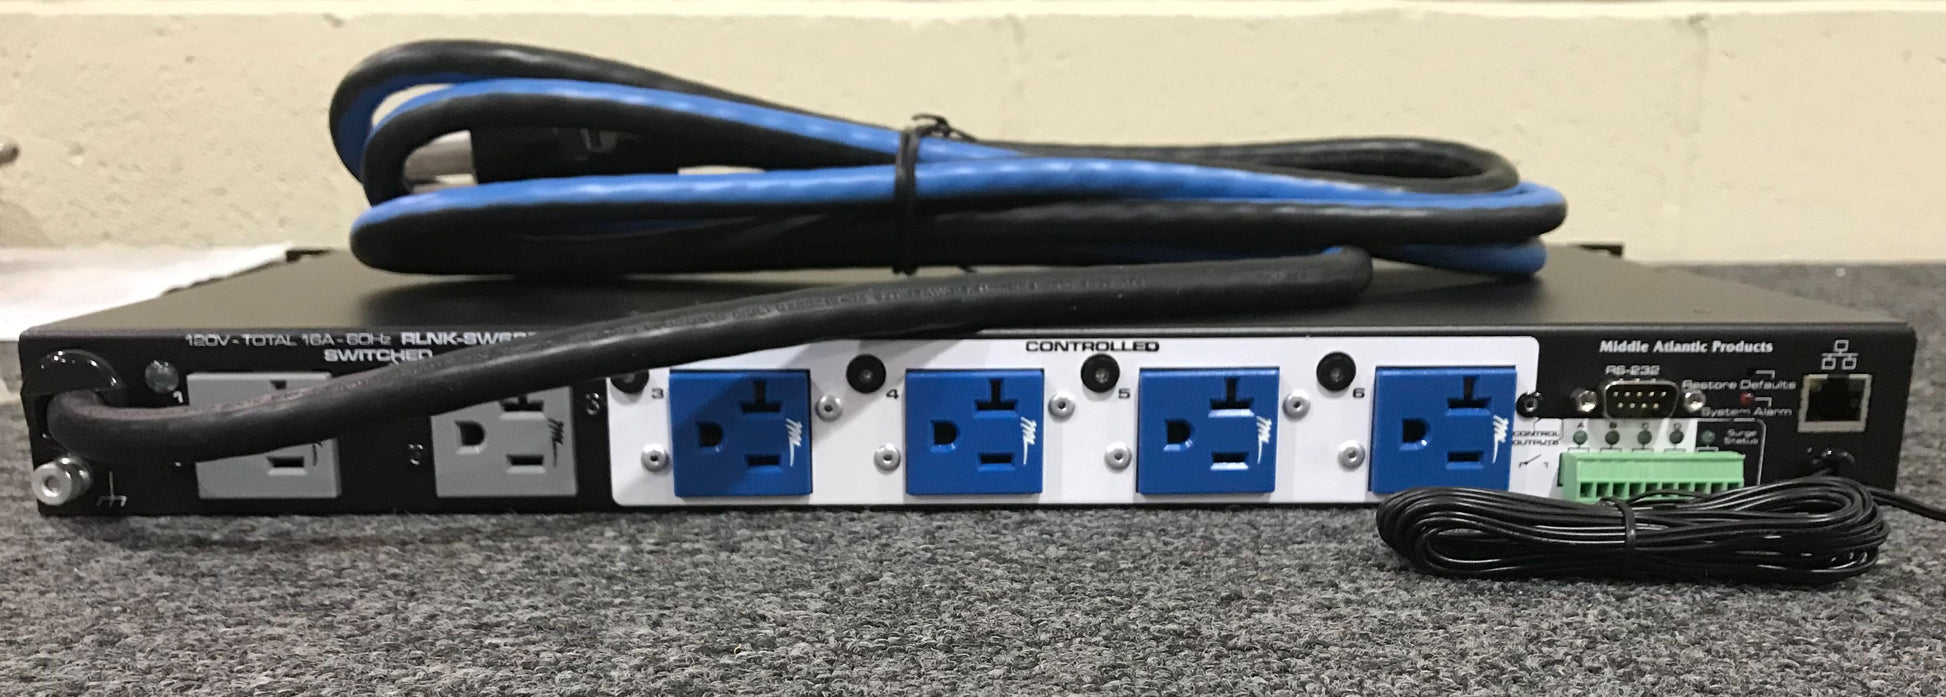 Middle Atlantic Products RLNK-SW620R Remote Control AC Power Strip. We Sell Professional Audio Equipment. Audio Systems, Amplifiers, Consoles, Mixers, Electronics, Entertainment, Sound, Live.